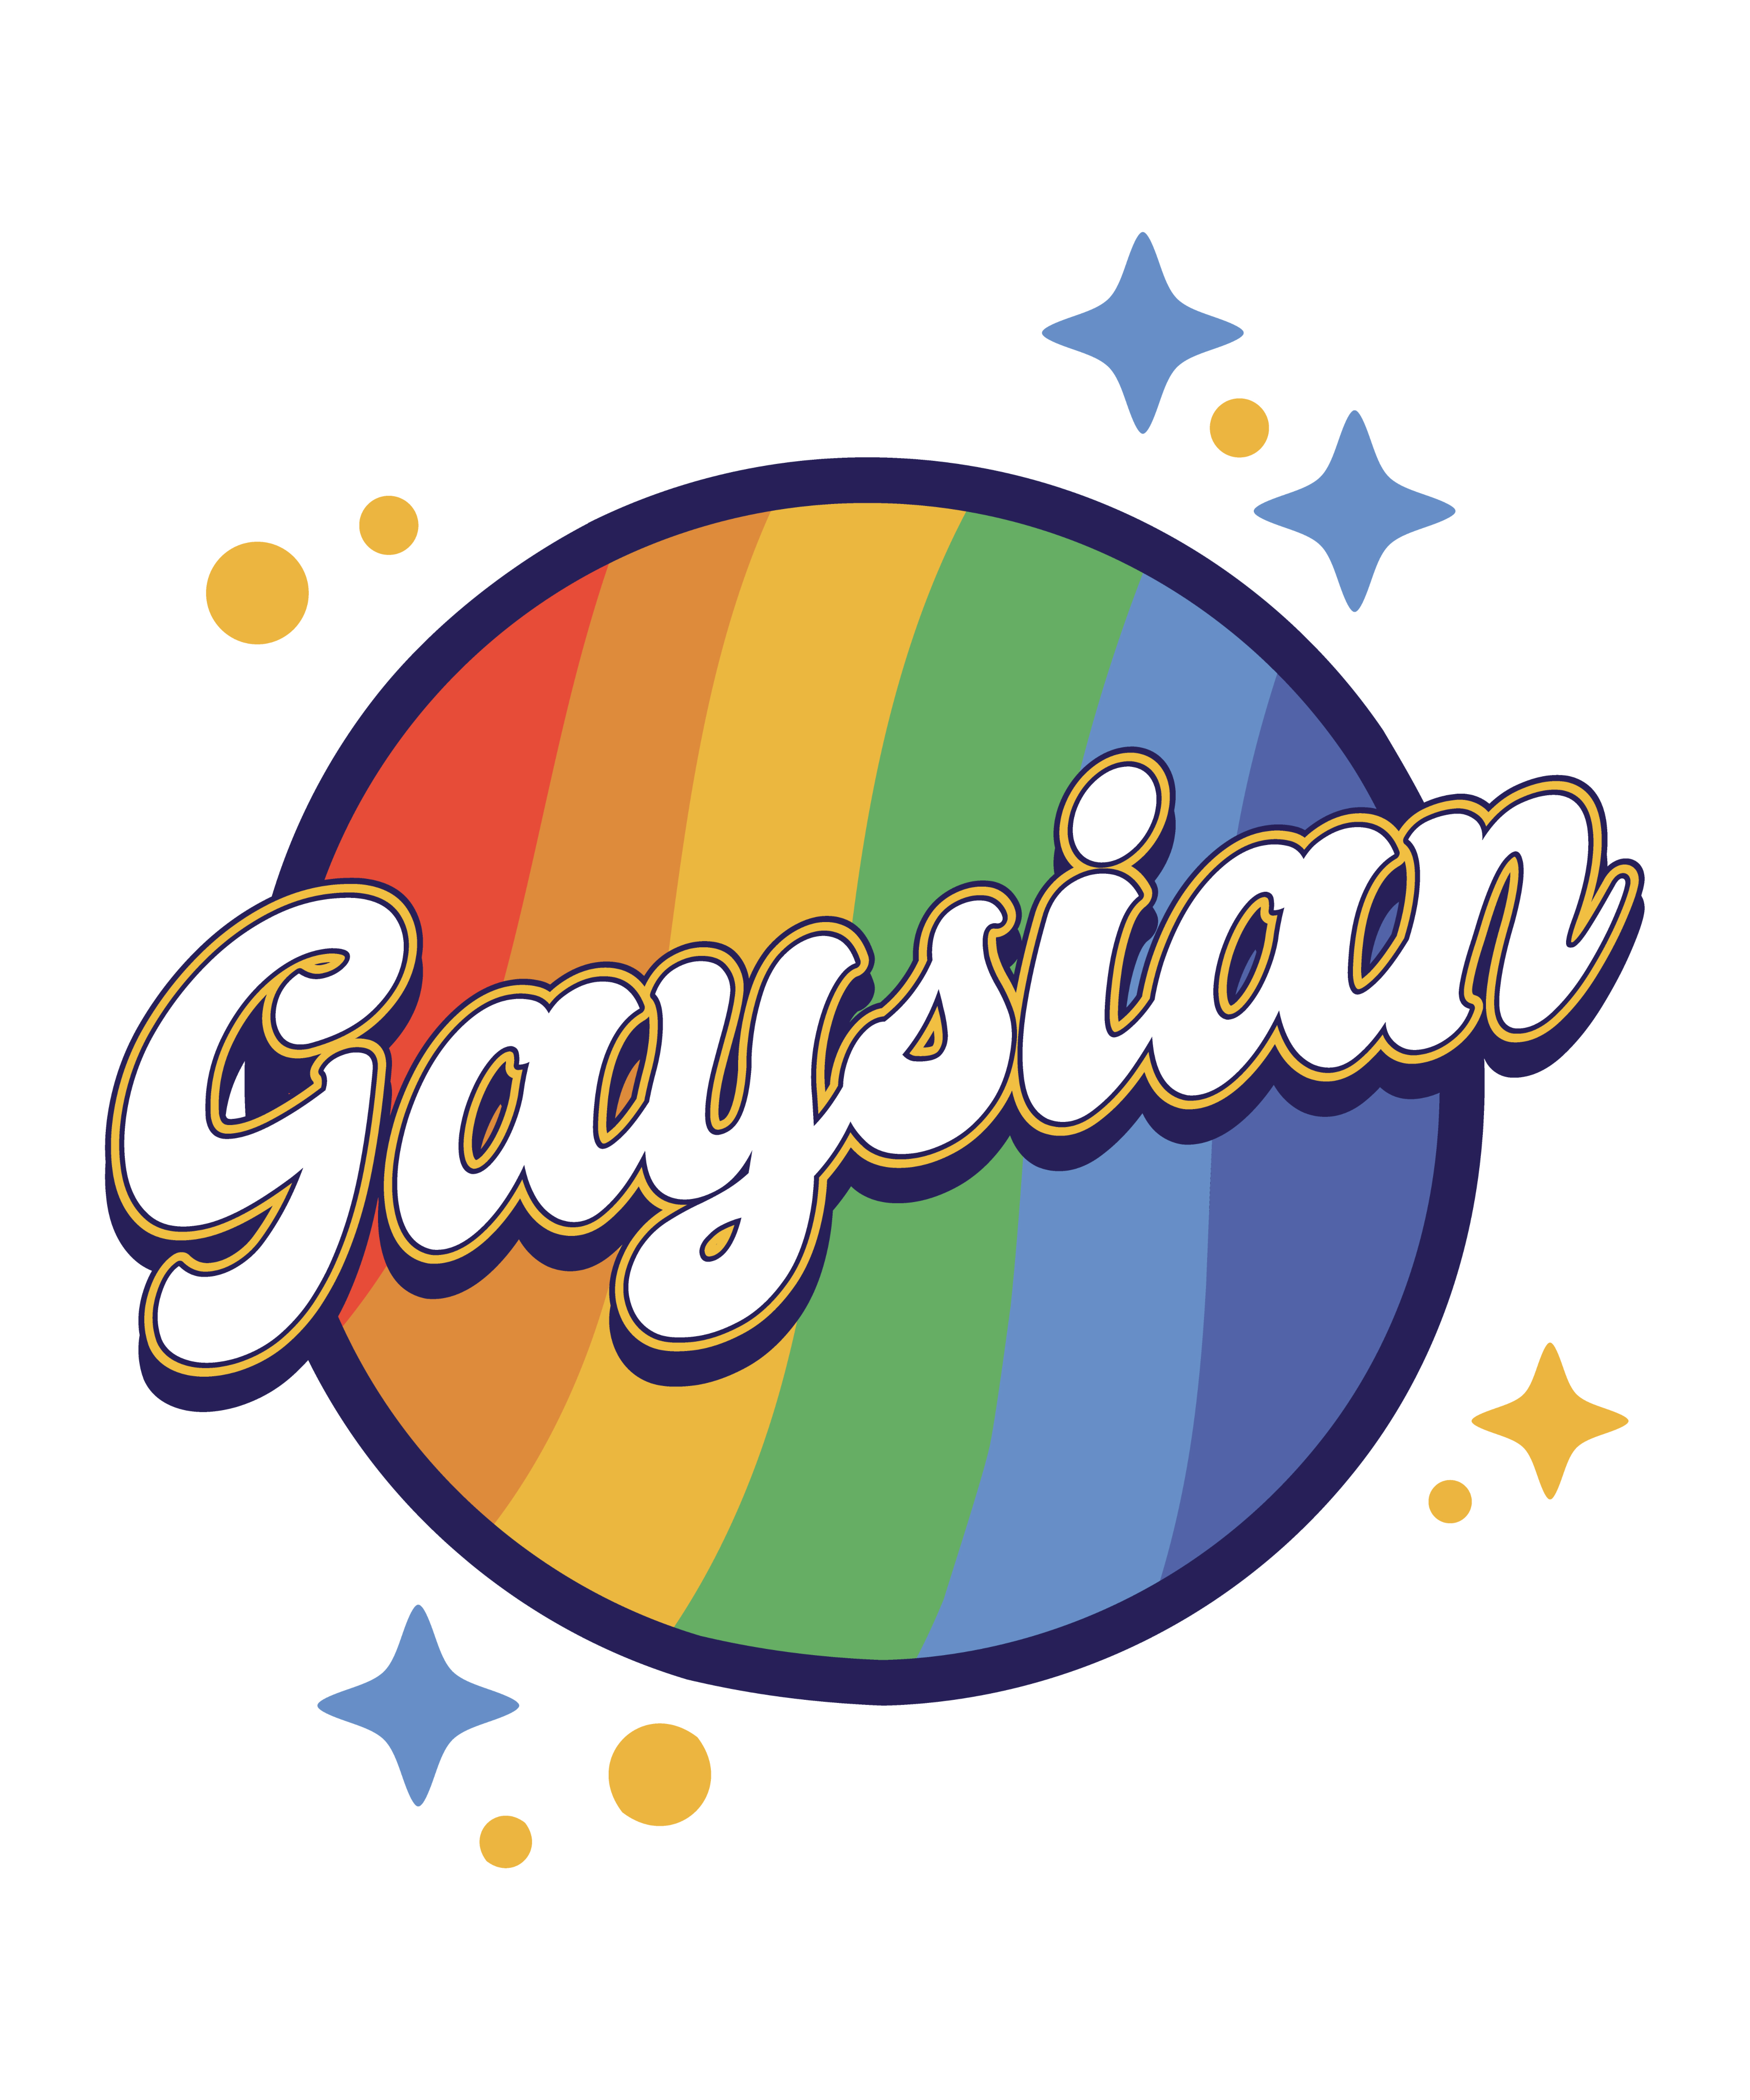 A Gaysian T-Shirt with white text representing Gaysian pride.